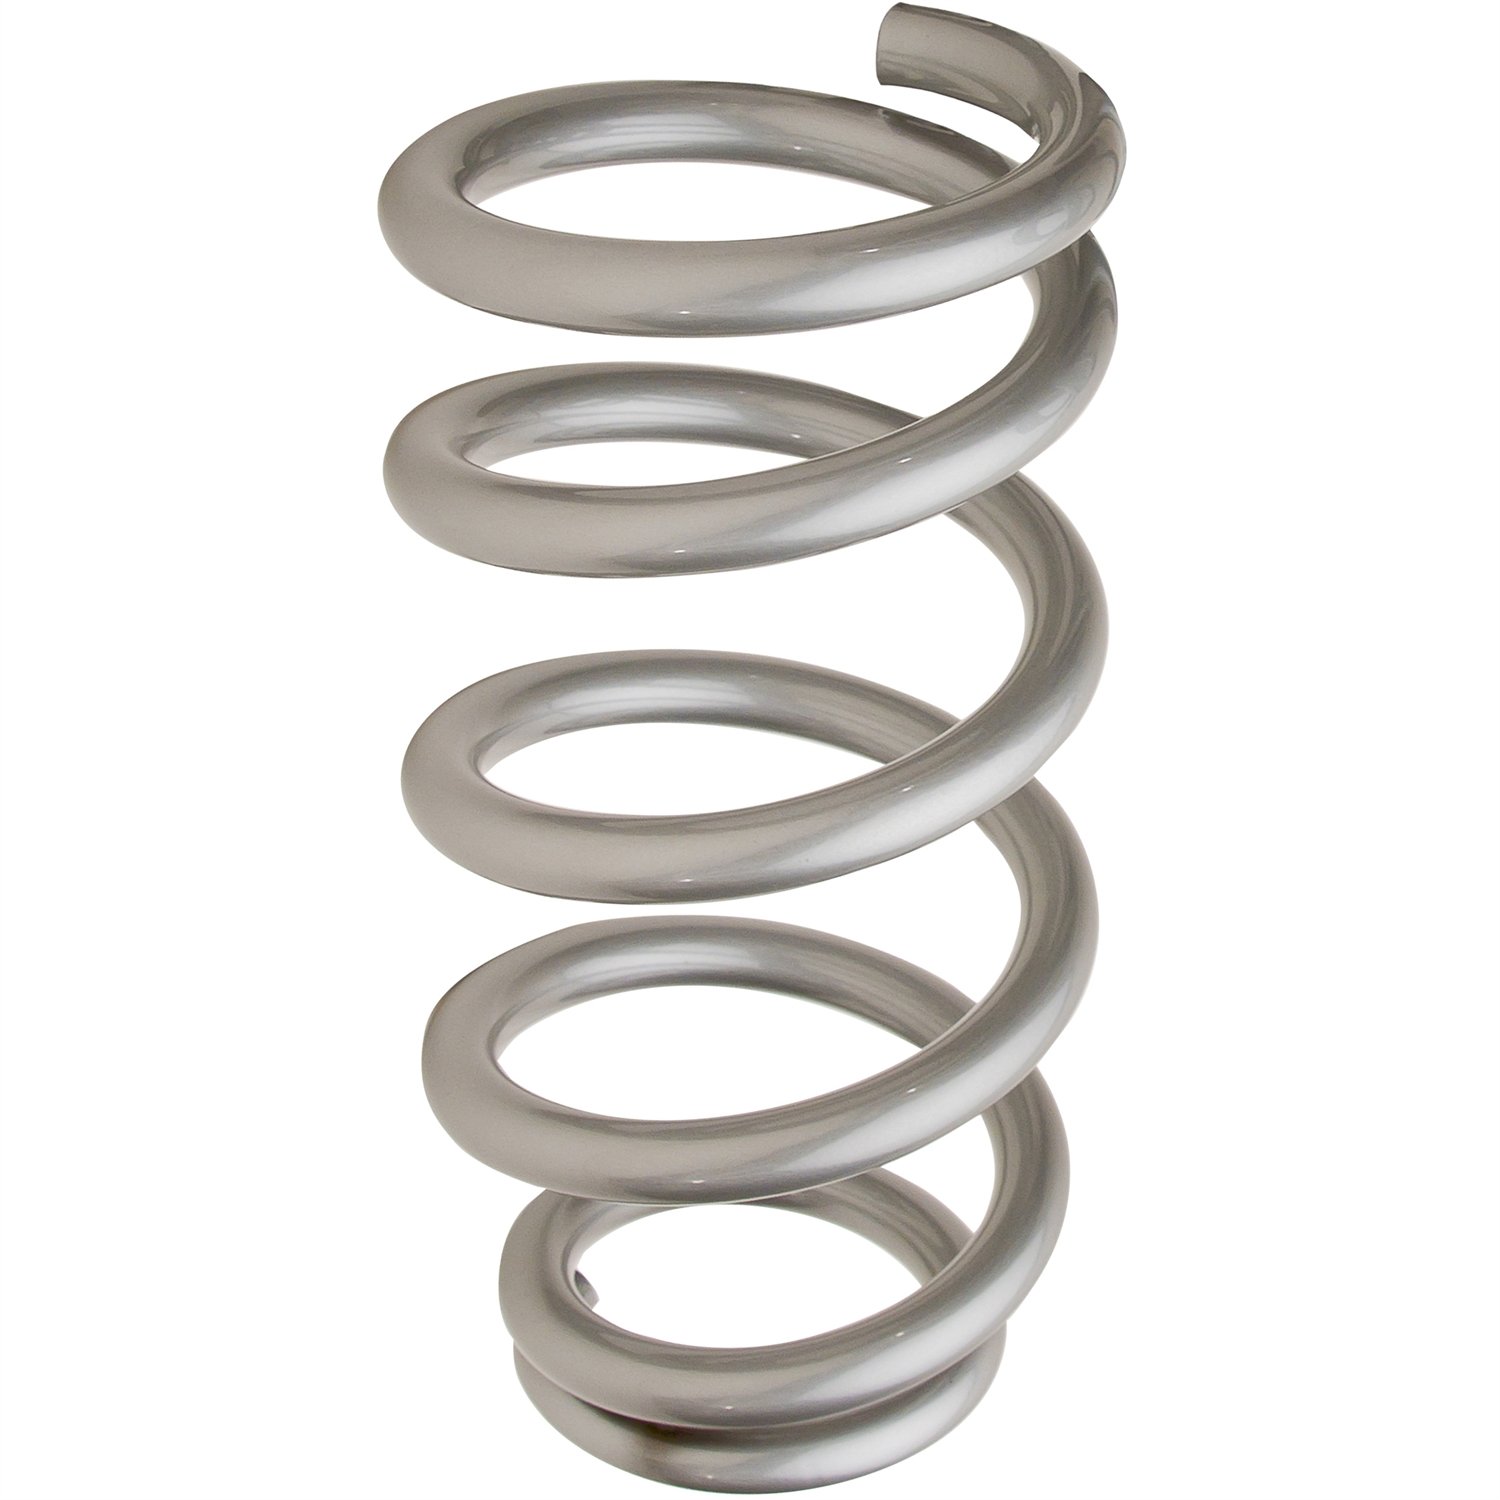 GM Style Flat & Ground Large High-Tensile Spring